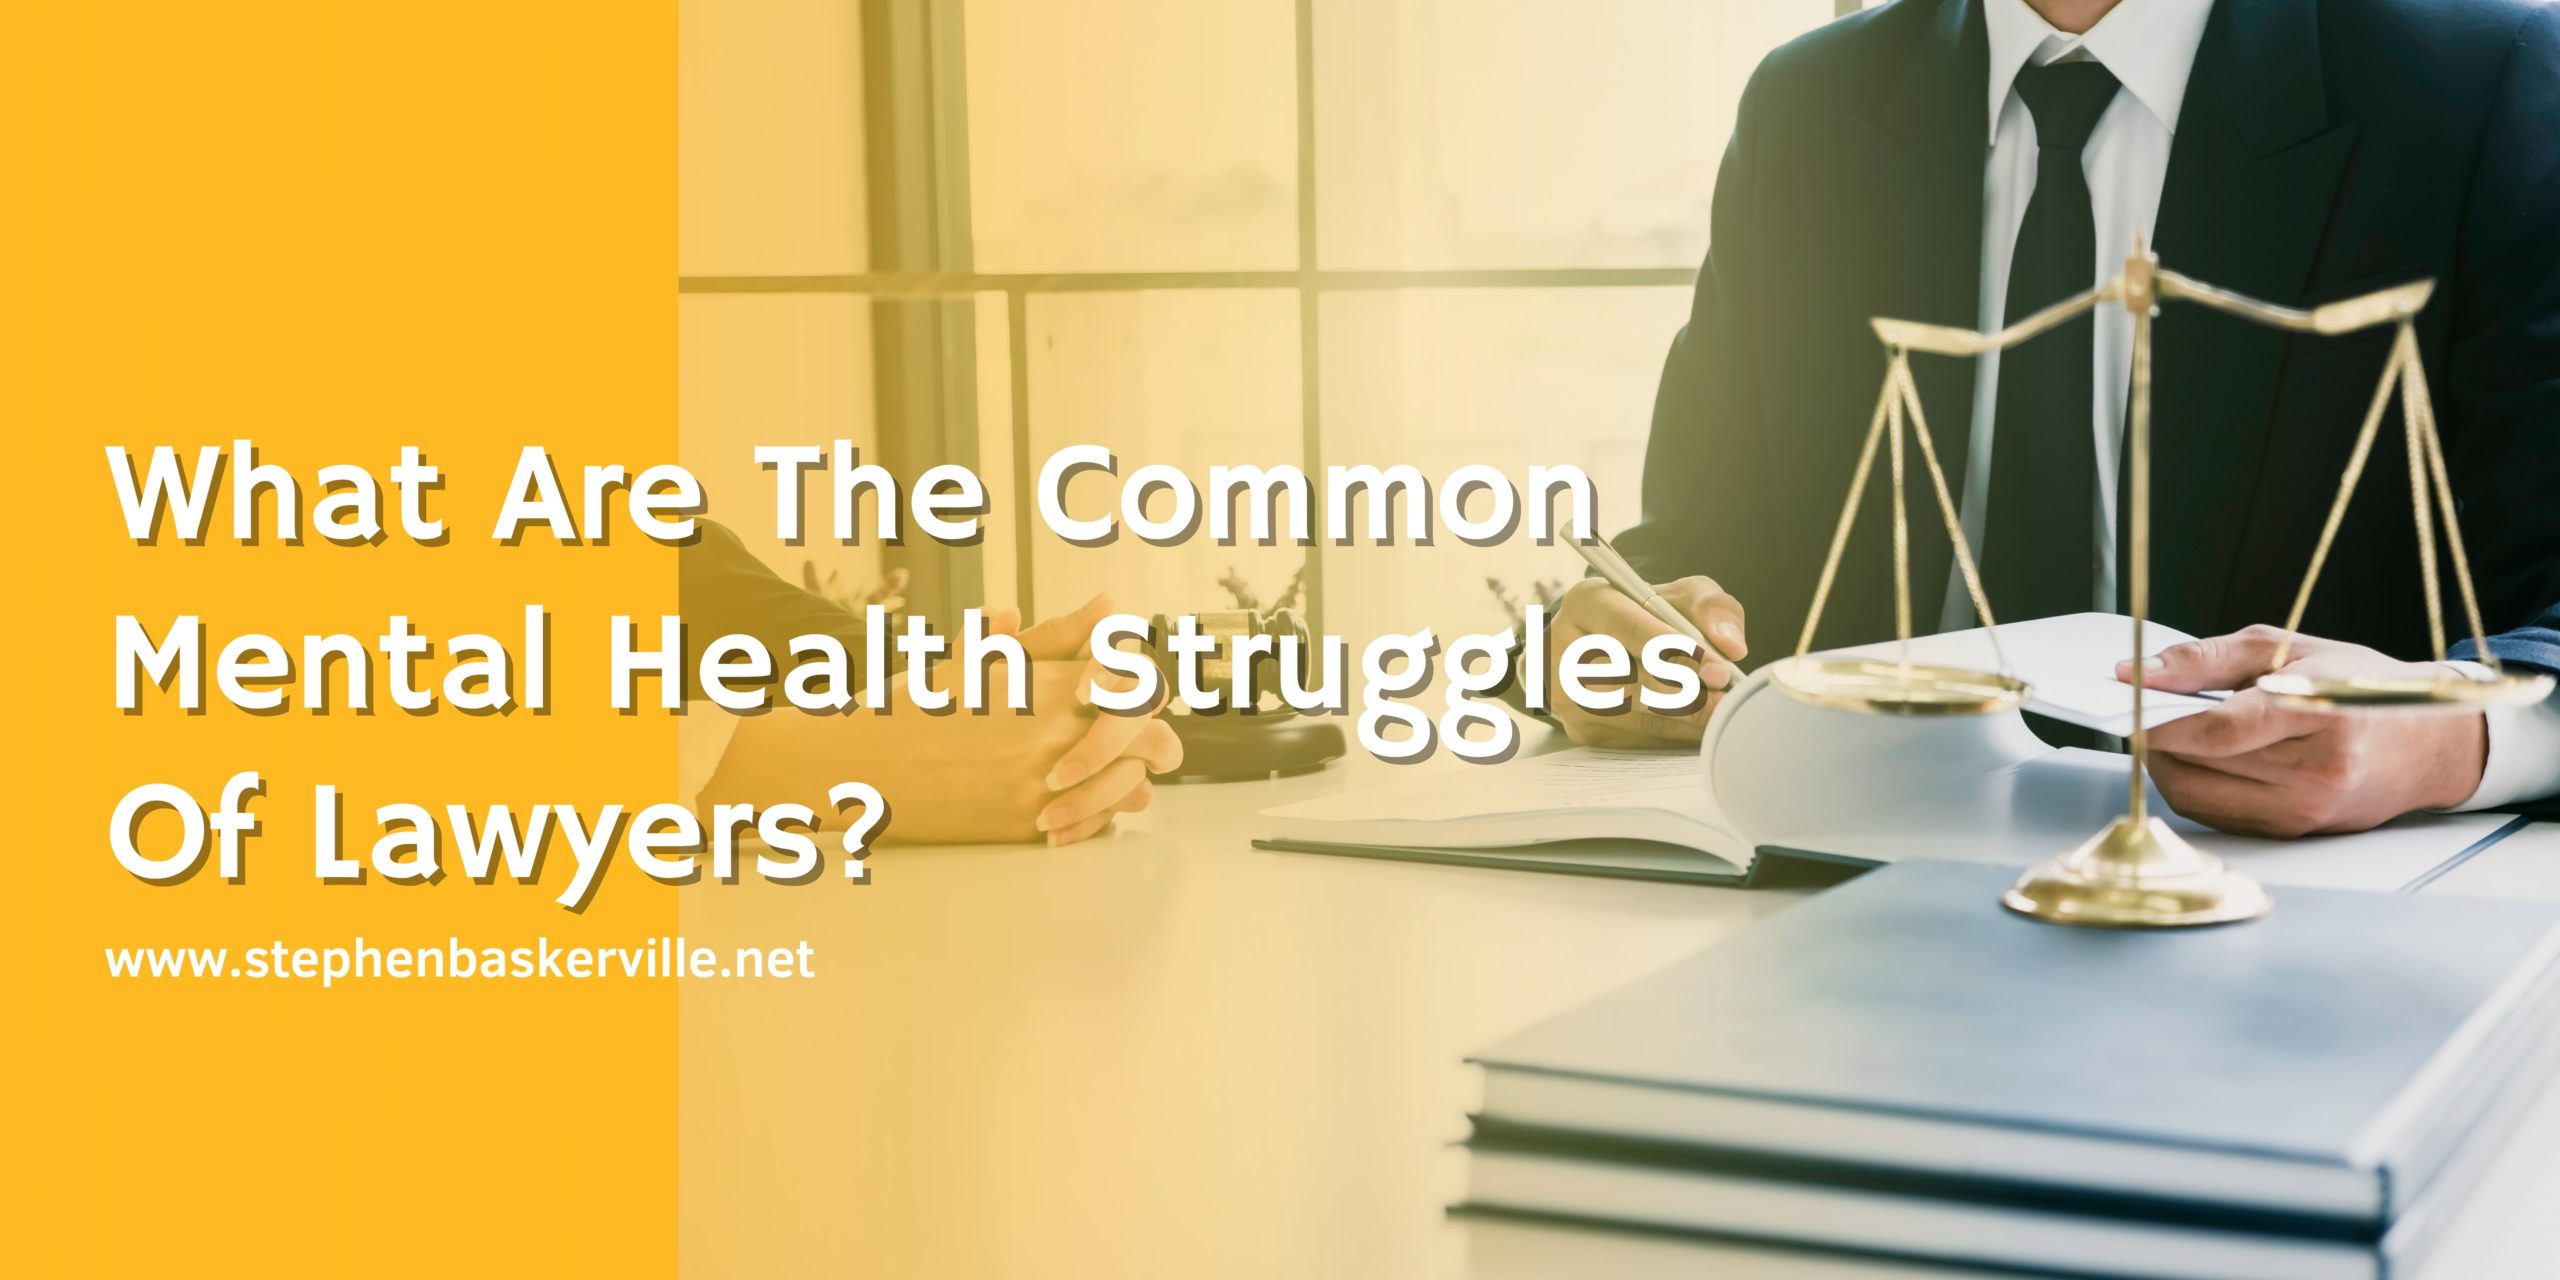 What Are The Common Mental Health Struggles Of Lawyers